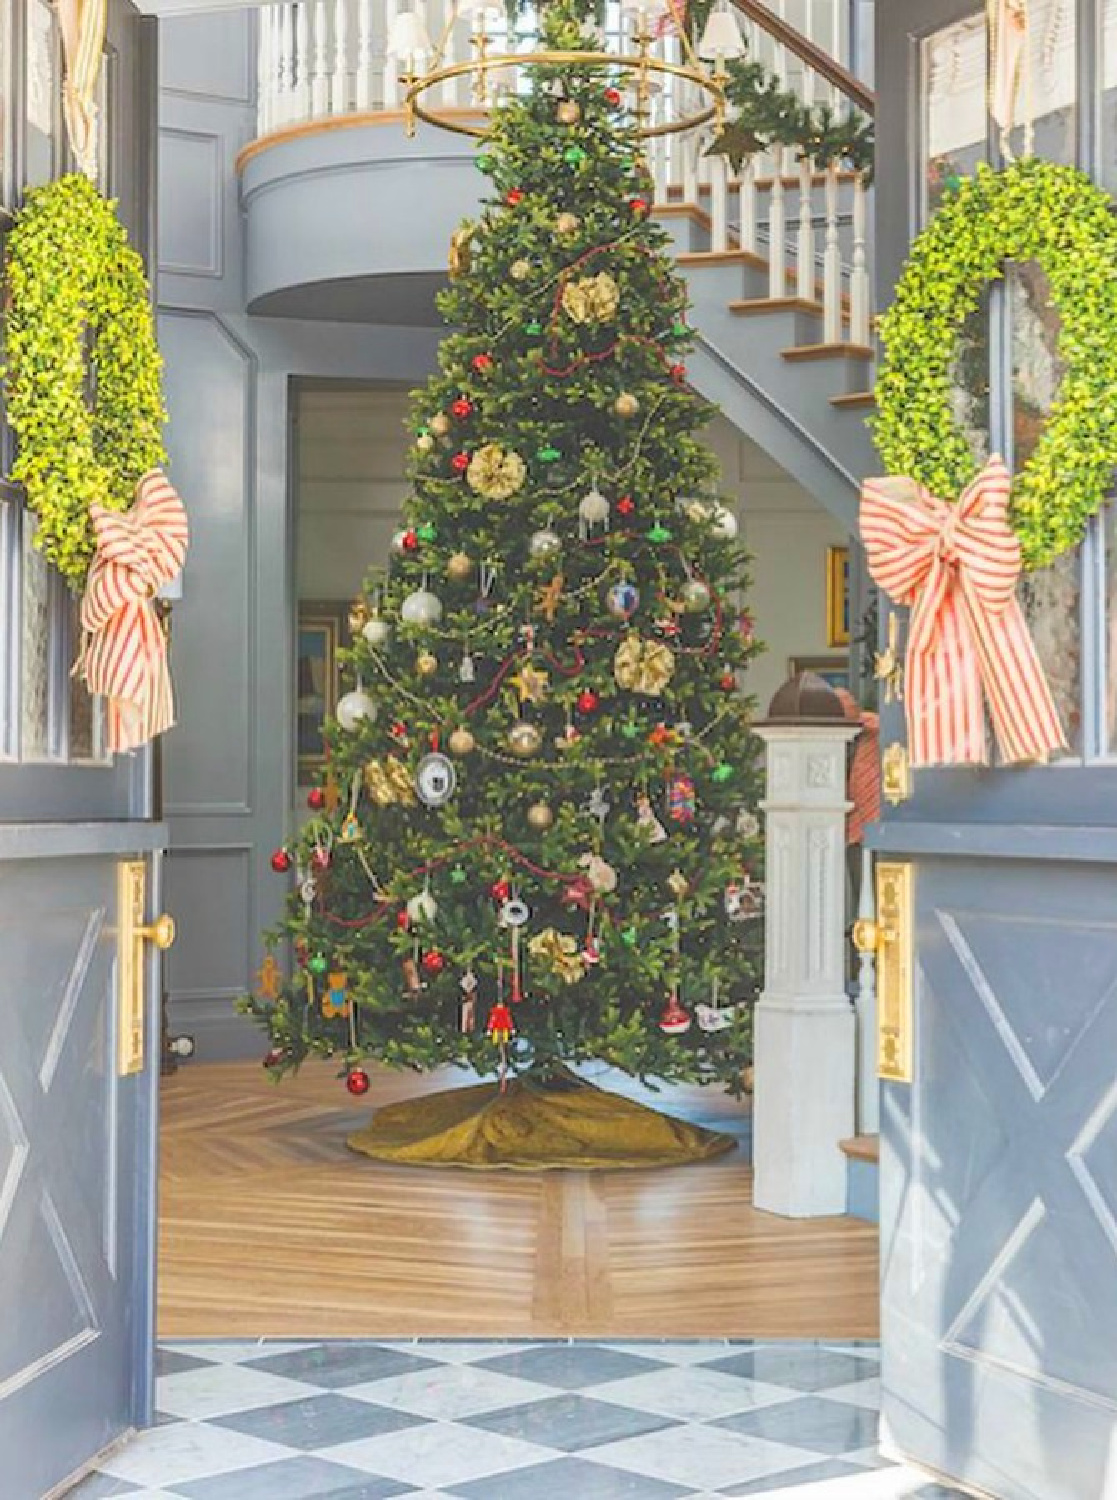 Holiday decorated front doors with boxwood wreaths and striped ribbons and foyer (with blue grey painted moldings) with grand Christmas tree at magnificent staircase - The Fox Group. #christmasfoyer #elegantchristmas